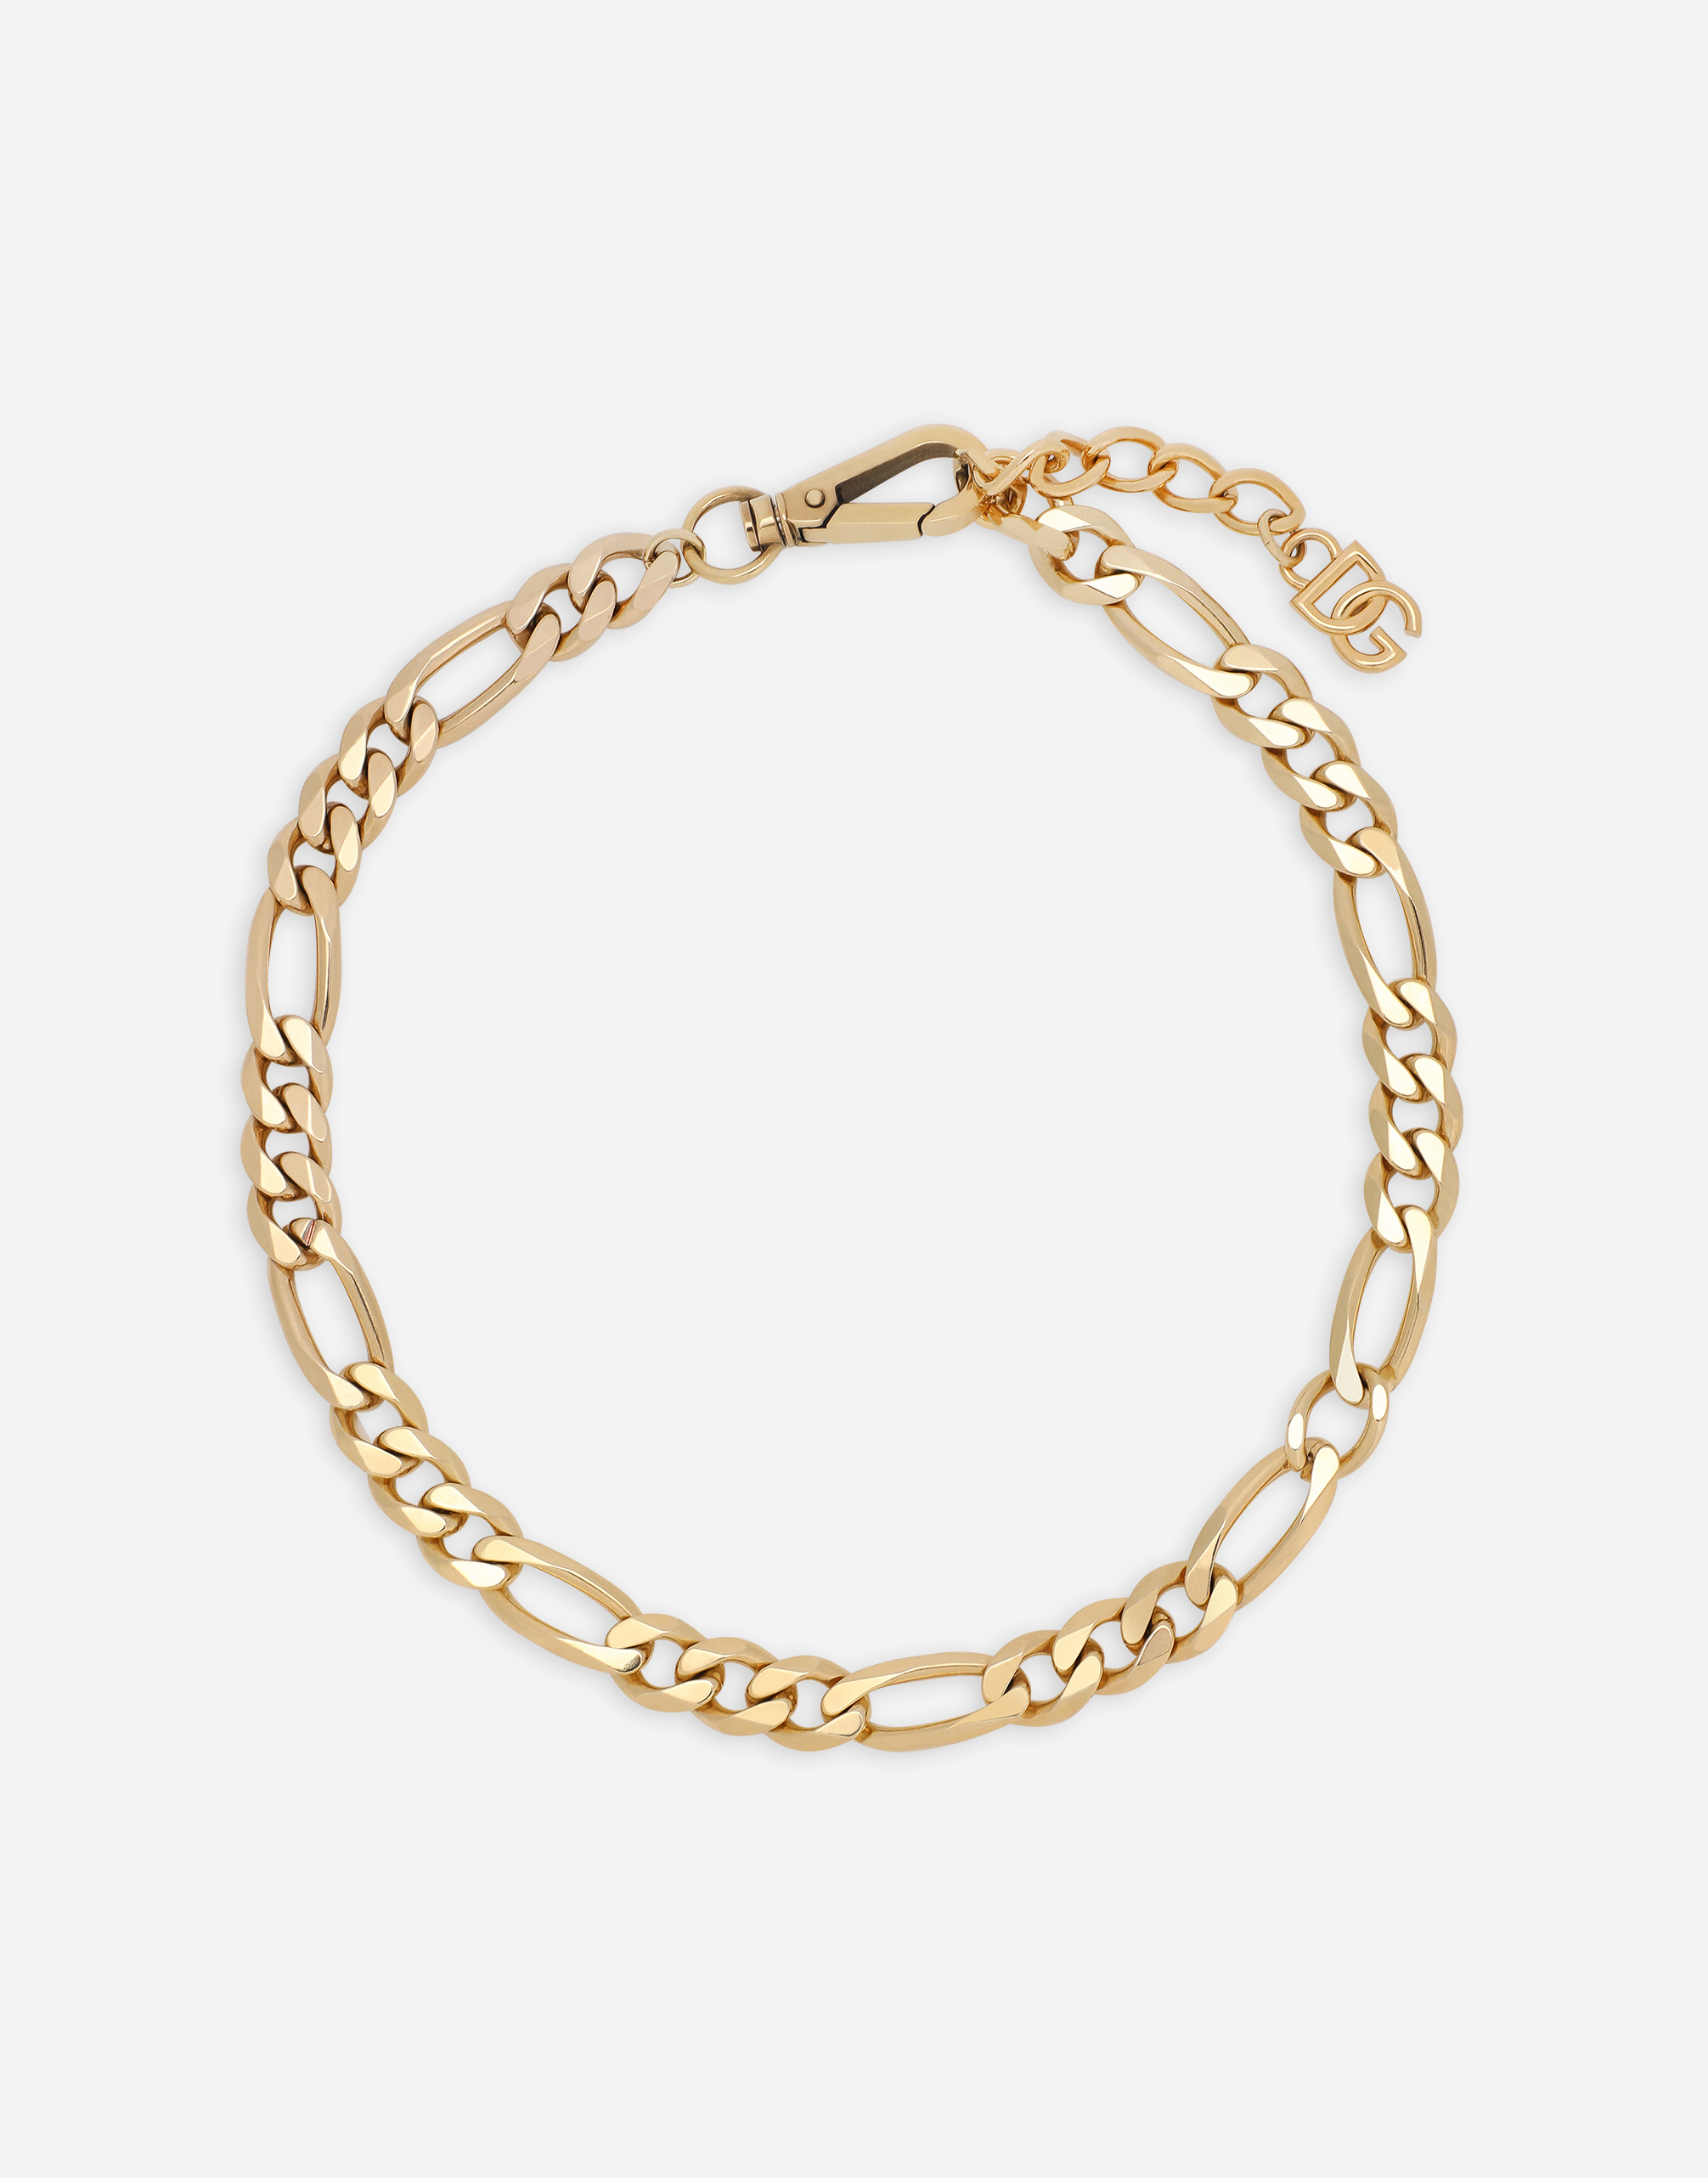 Chain necklace in Gold